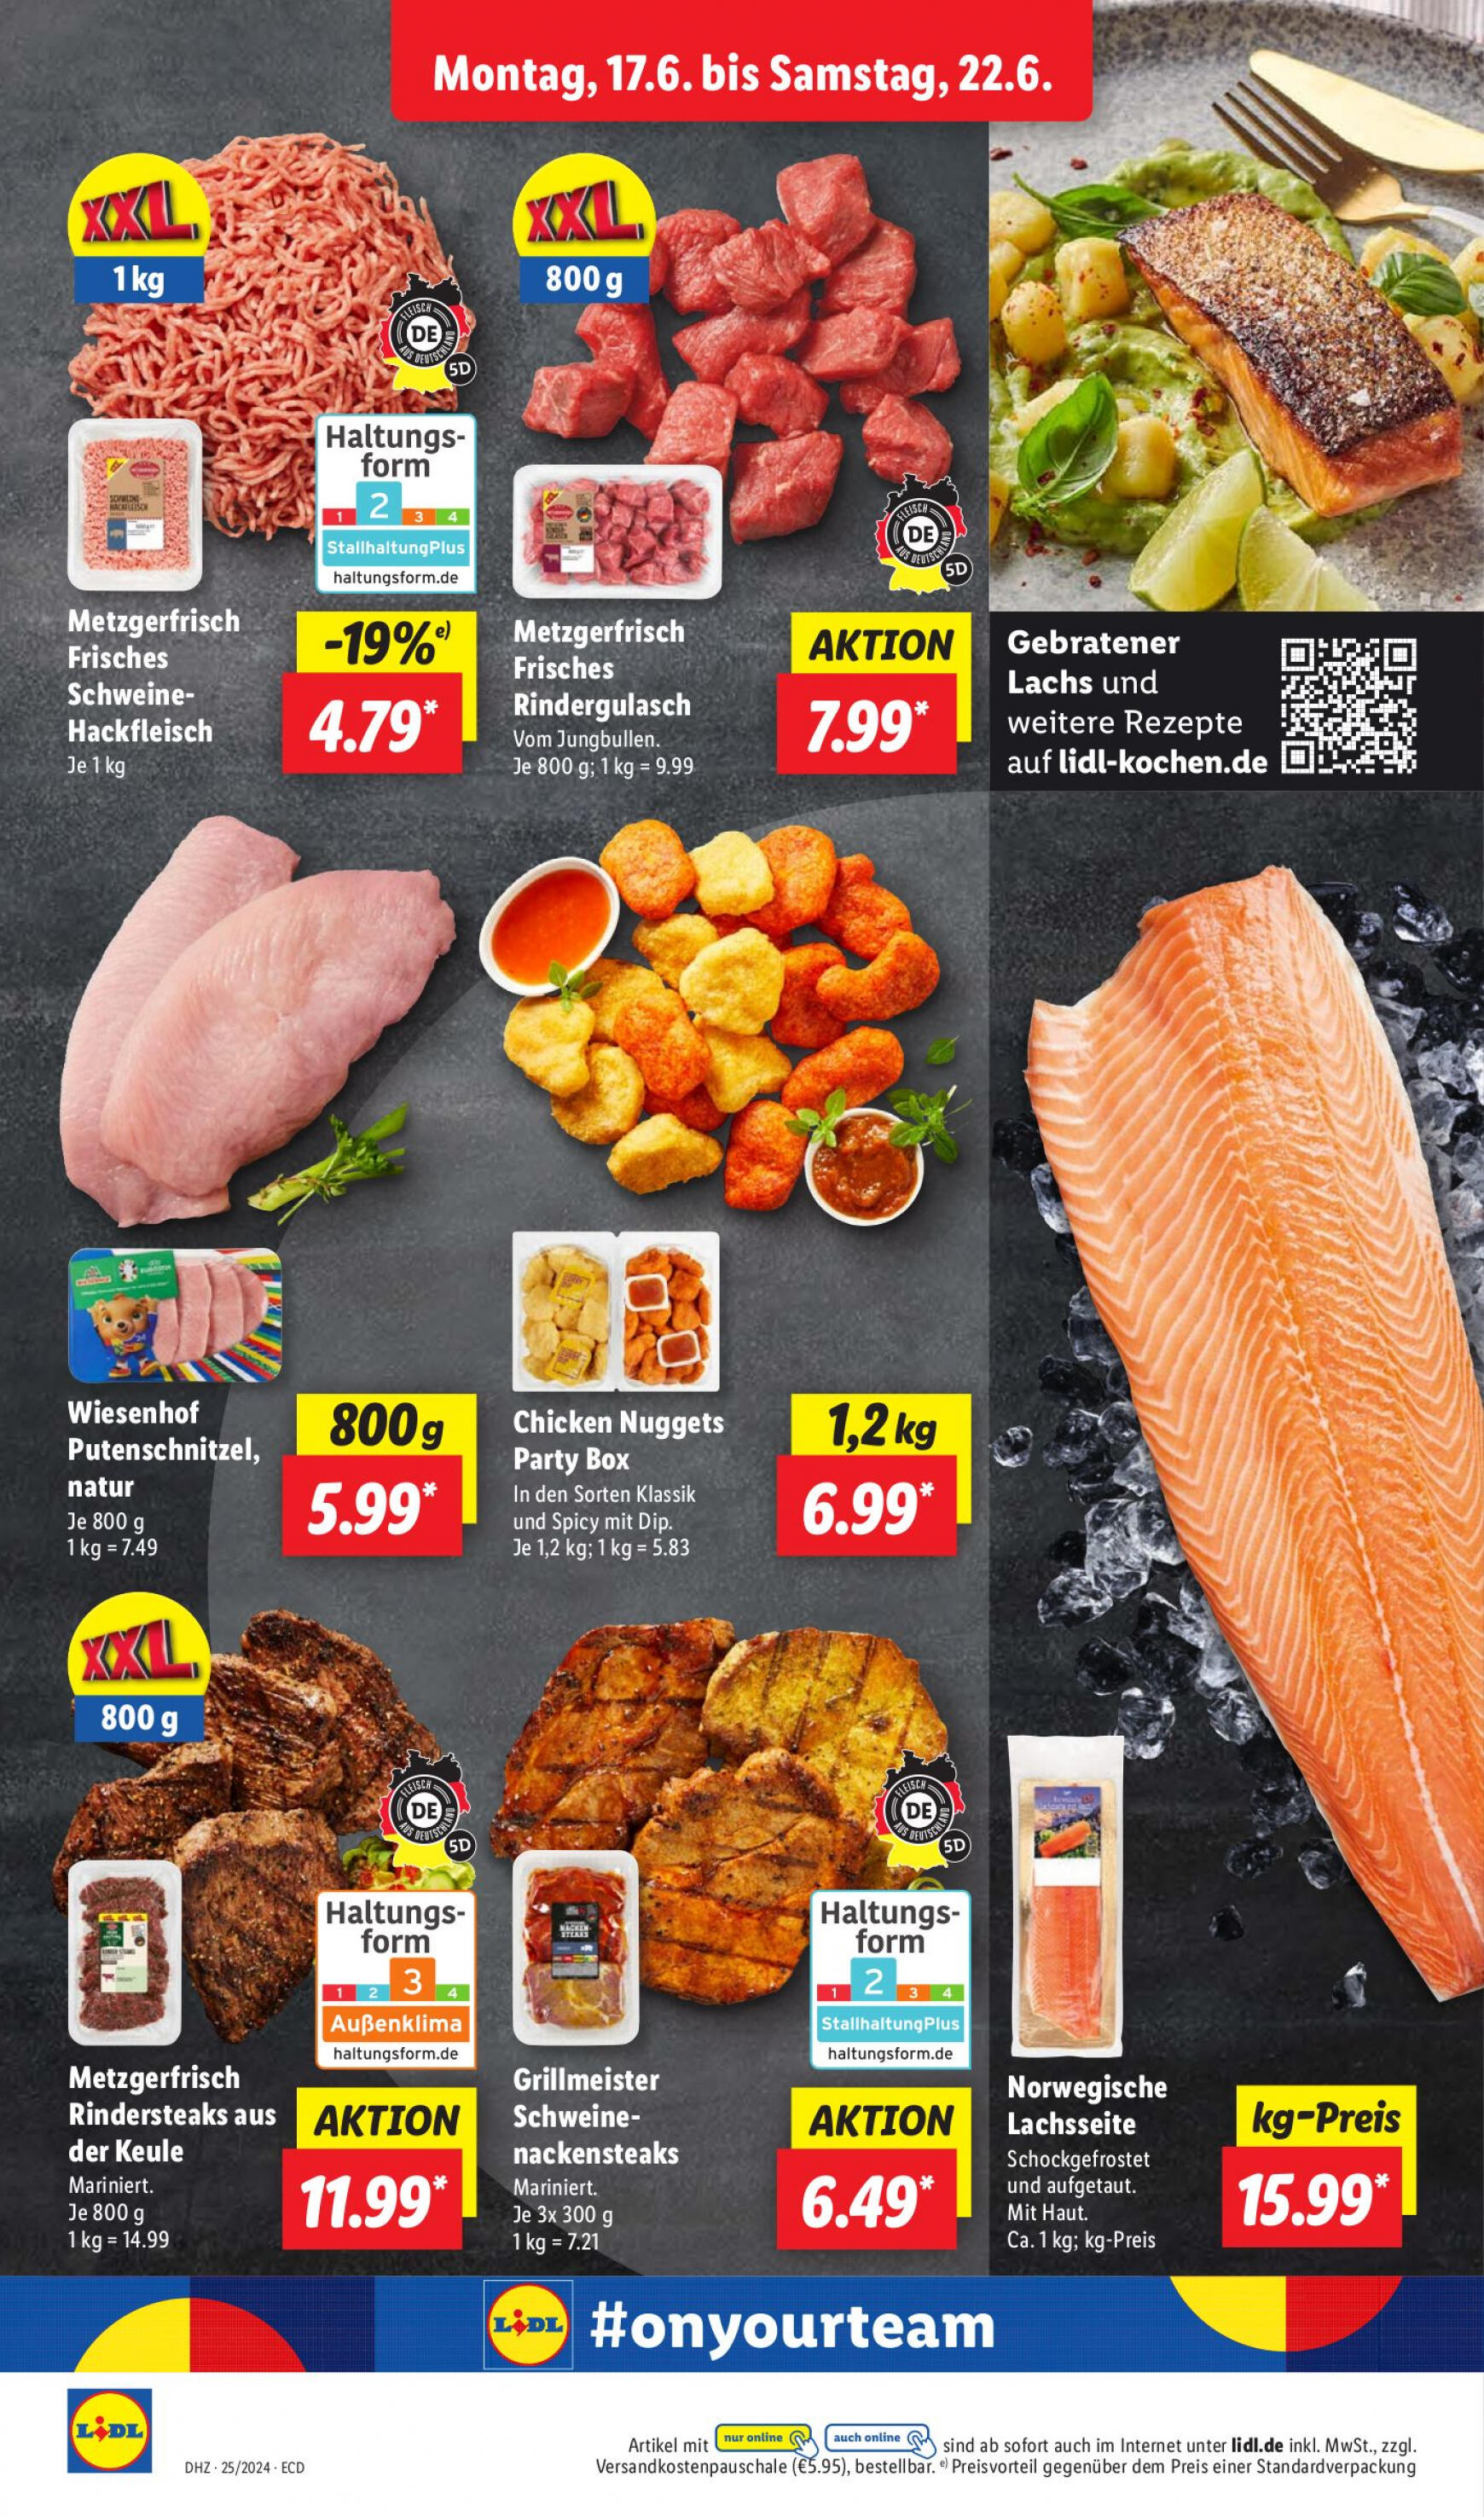 lidl - Flyer Lidl aktuell 17.06. - 22.06. - page: 6